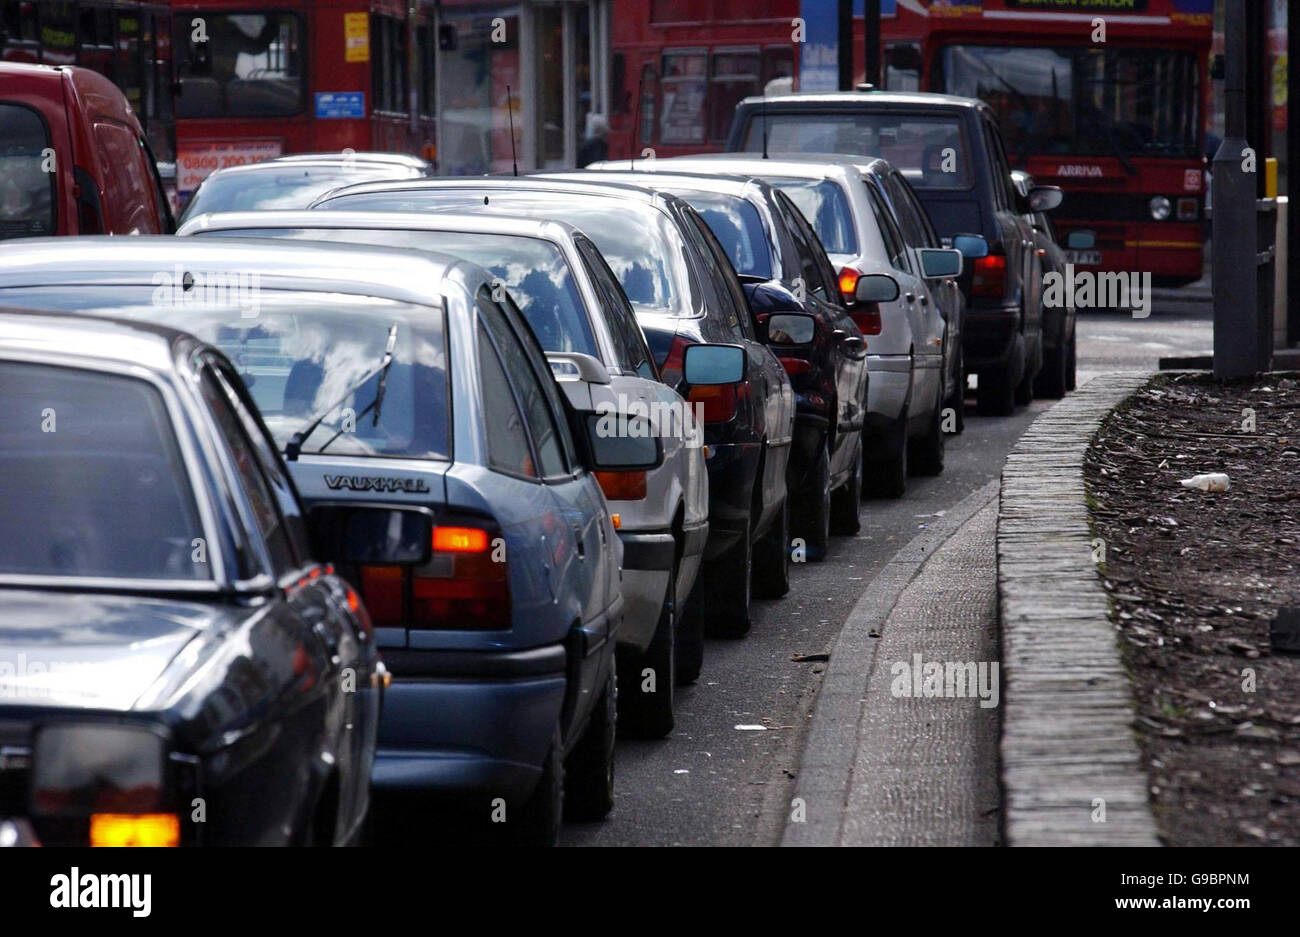 TRANSPORT Commute. Stock picture of a traffic jam in London. Stock Photo